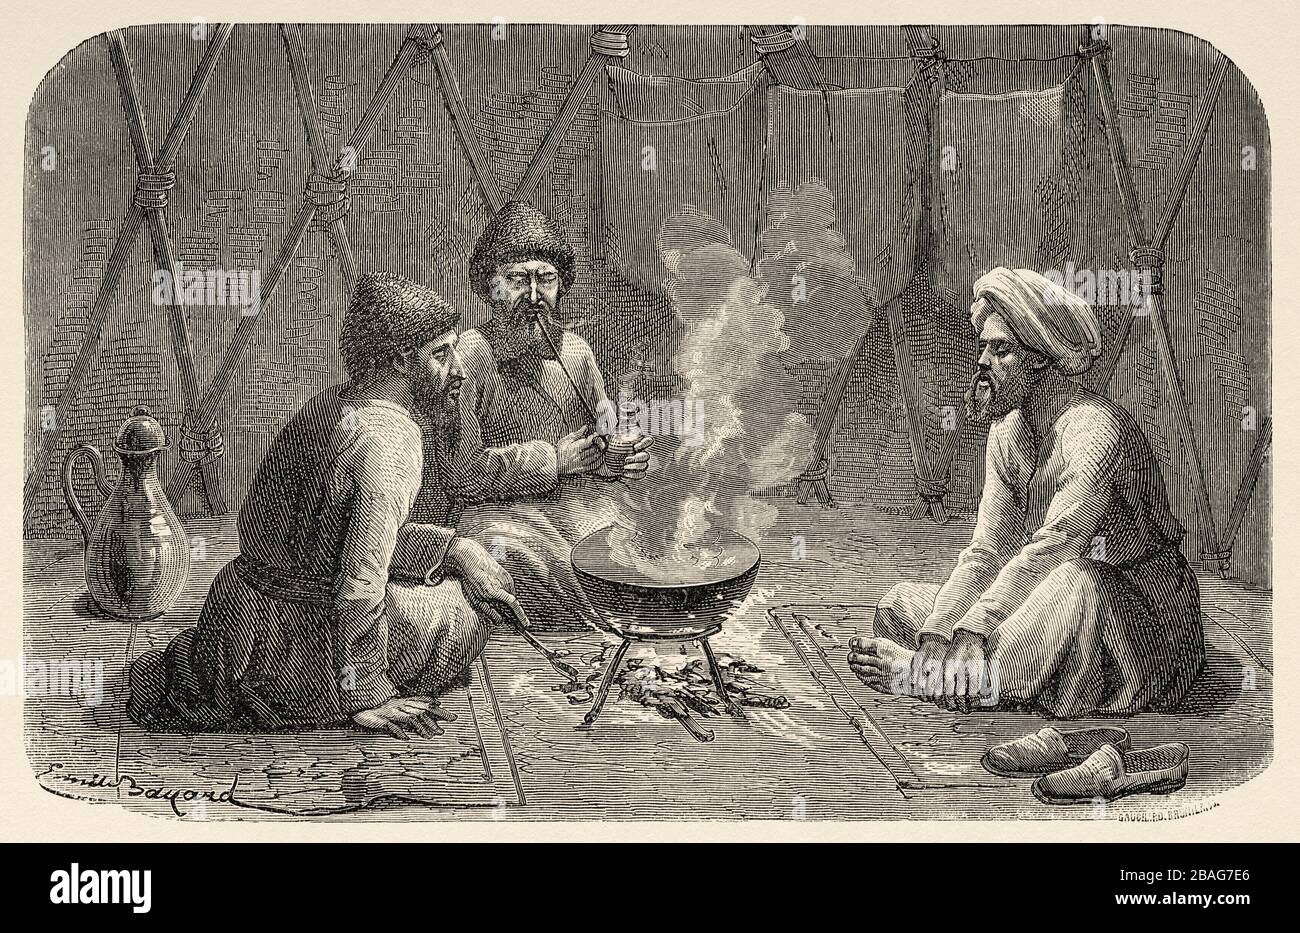 Interior of a Turkmen tent, from Travels in central Asia 1863 by Armin Vambery. Old engraving El Mundo en la Mano 1878 Stock Photo